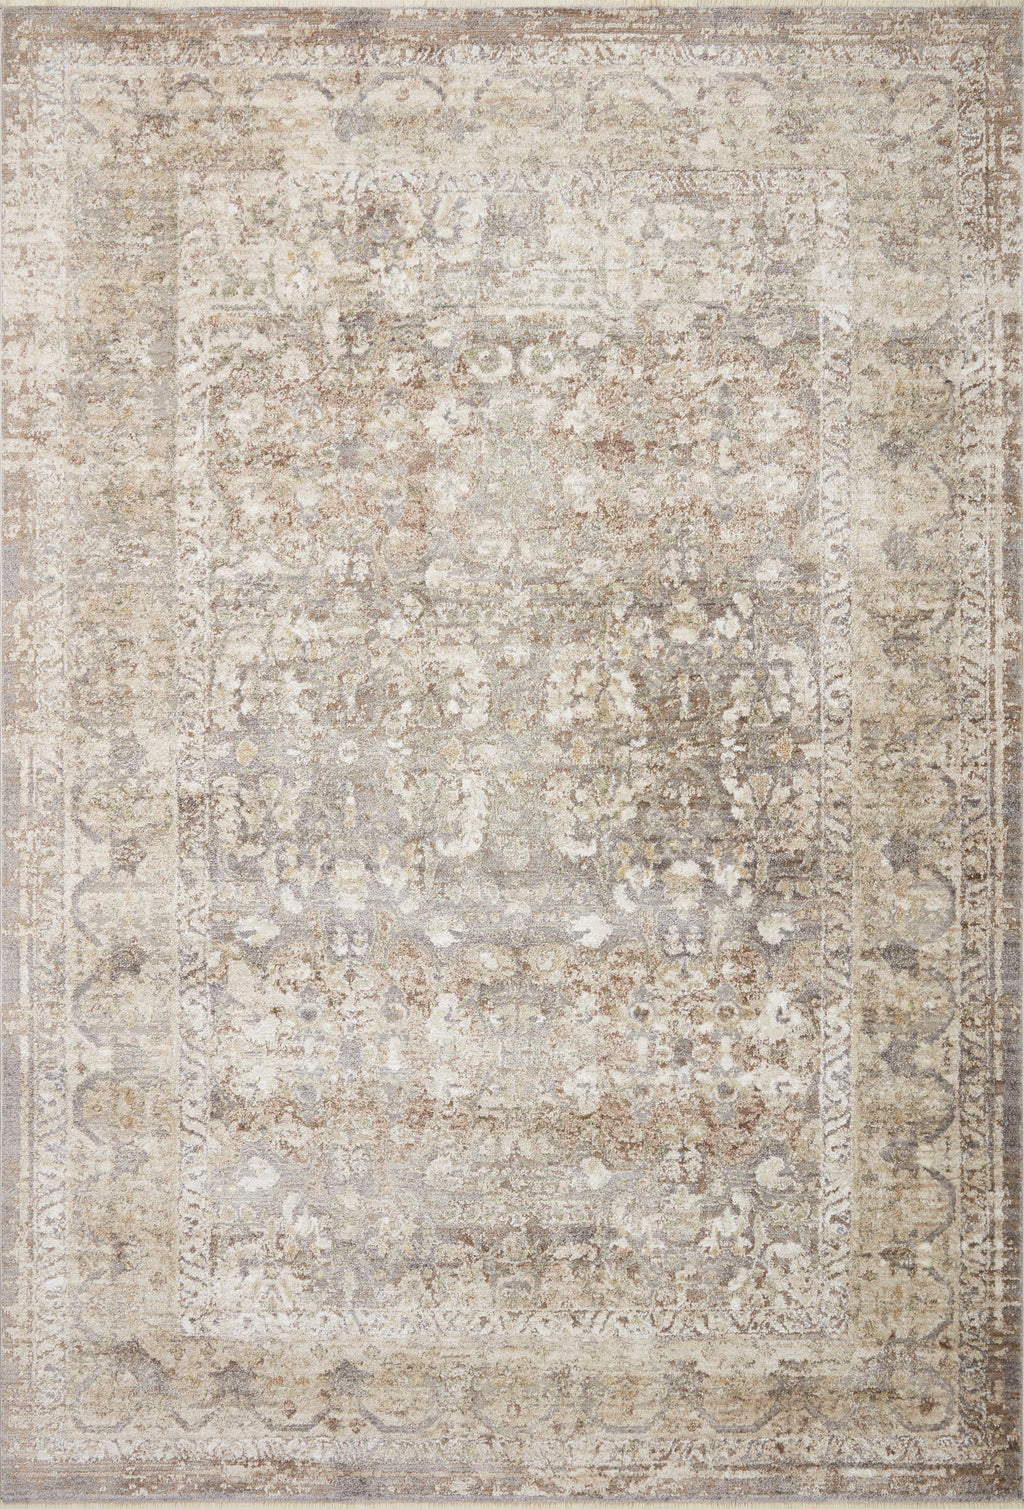 Sonnet Collection Rug in Grey / Sage Gray sample Power-Loomed Polypropylene/Polyester